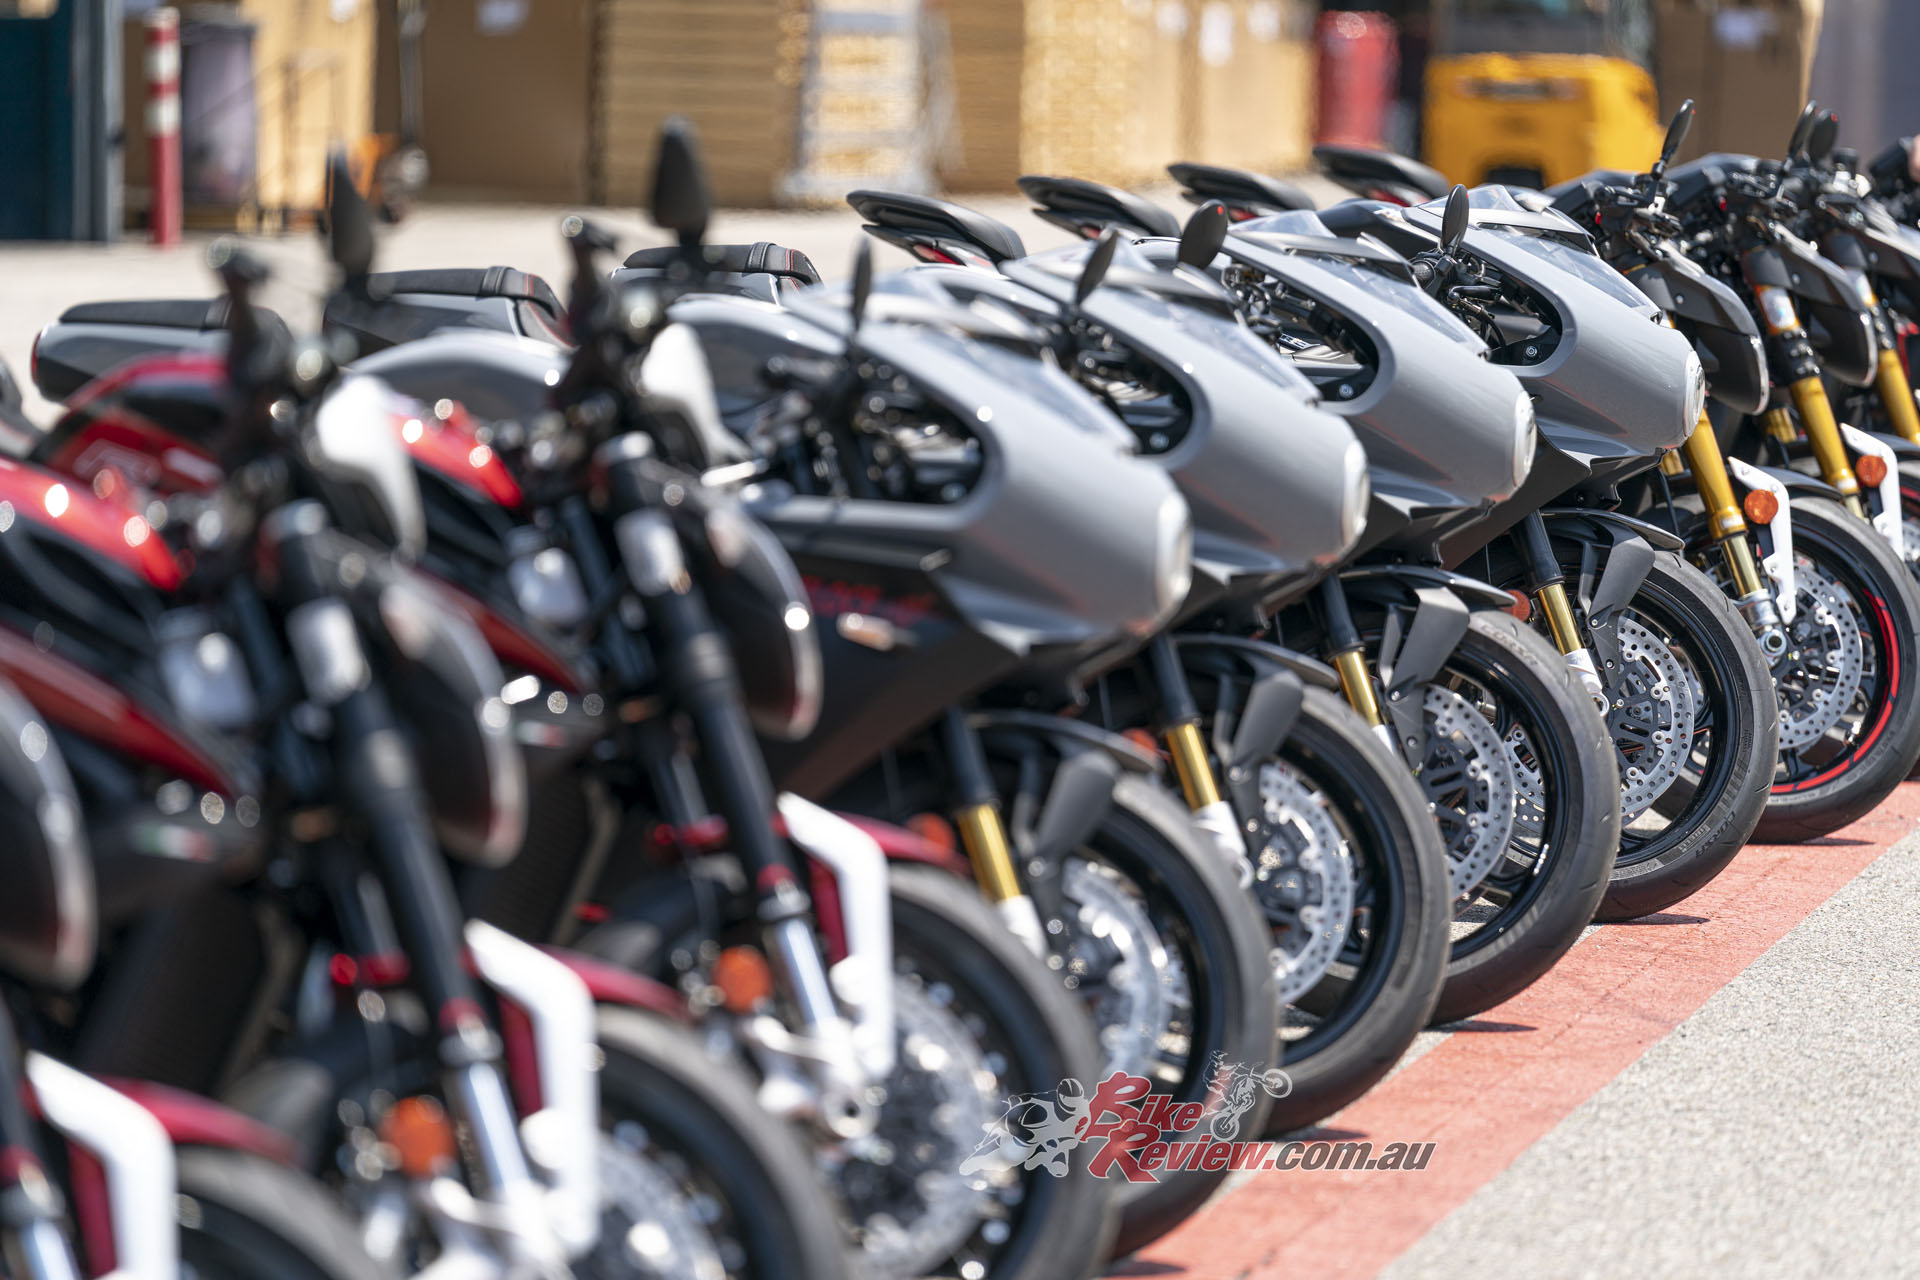 MV Agusta sold 6,000 bikes in 2022. This year they're going to increase that to 9,000 bikes, and 12,000 in 2024.